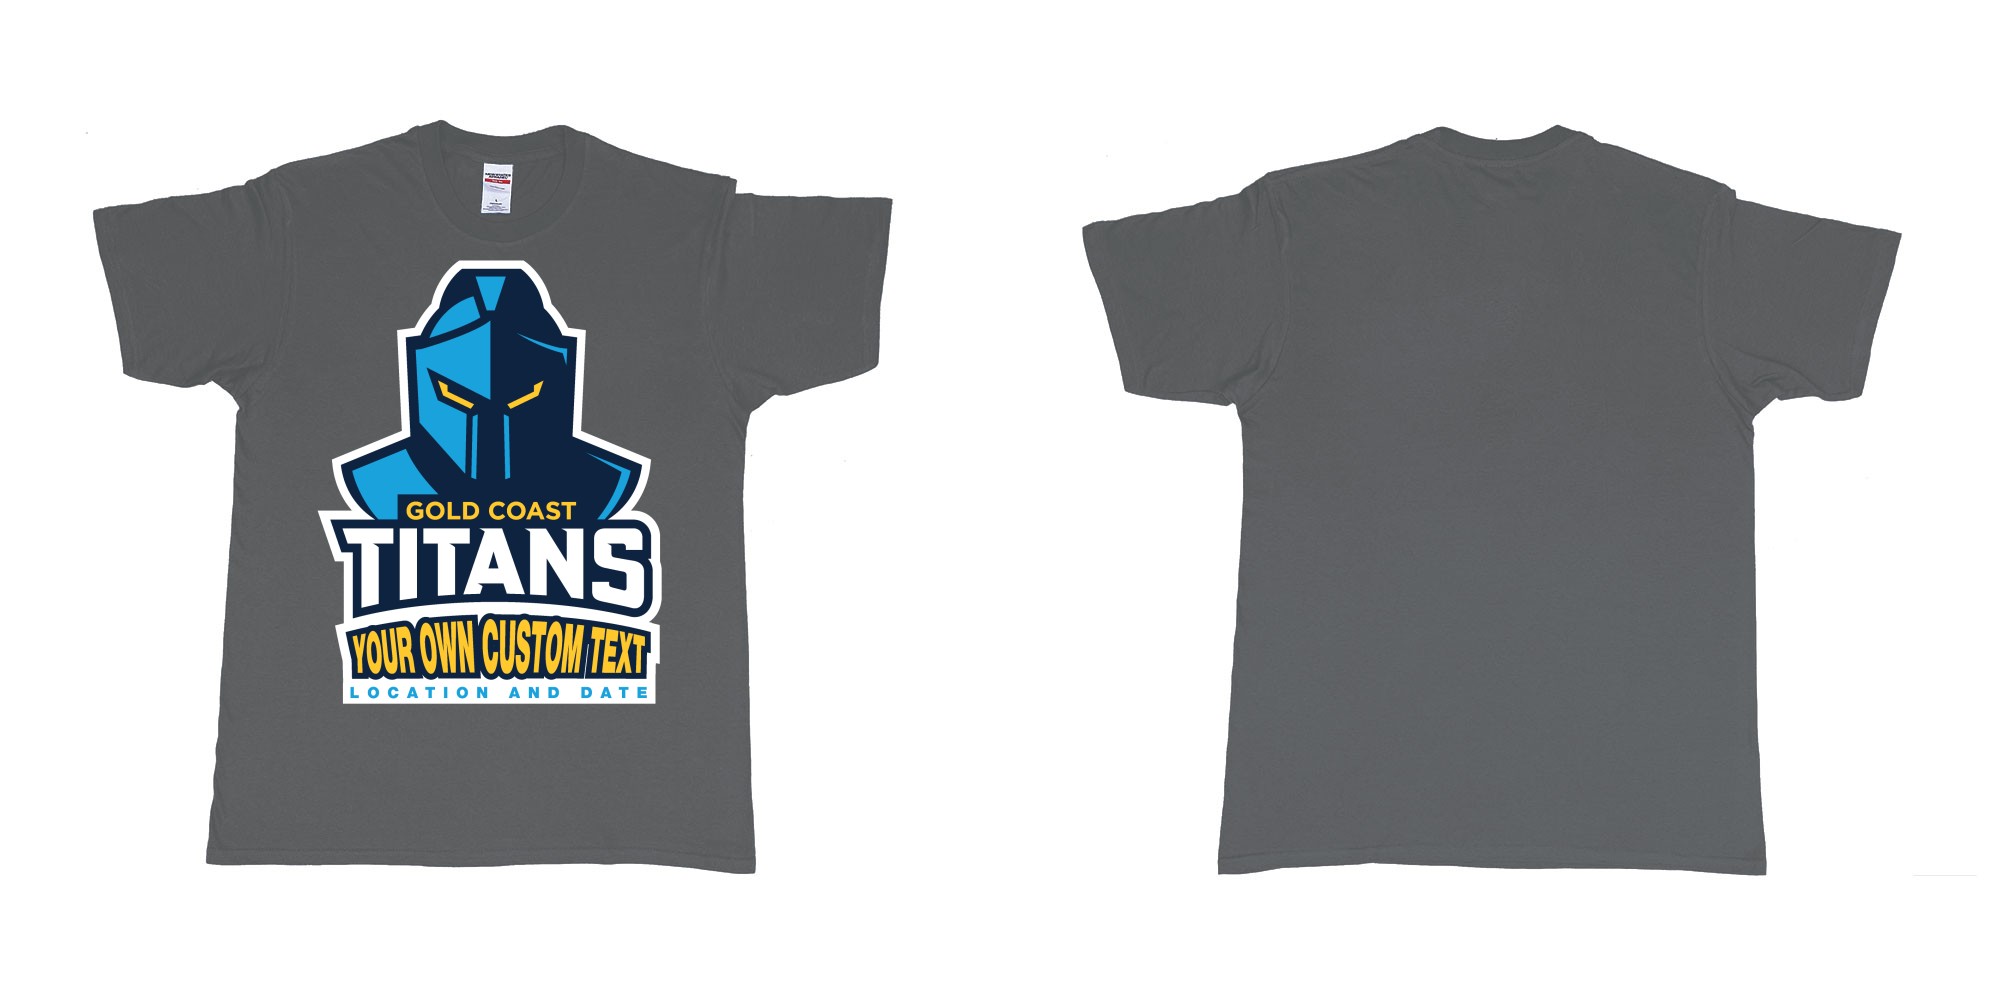 Custom tshirt design gold coast titans own custom design print in fabric color charcoal choice your own text made in Bali by The Pirate Way